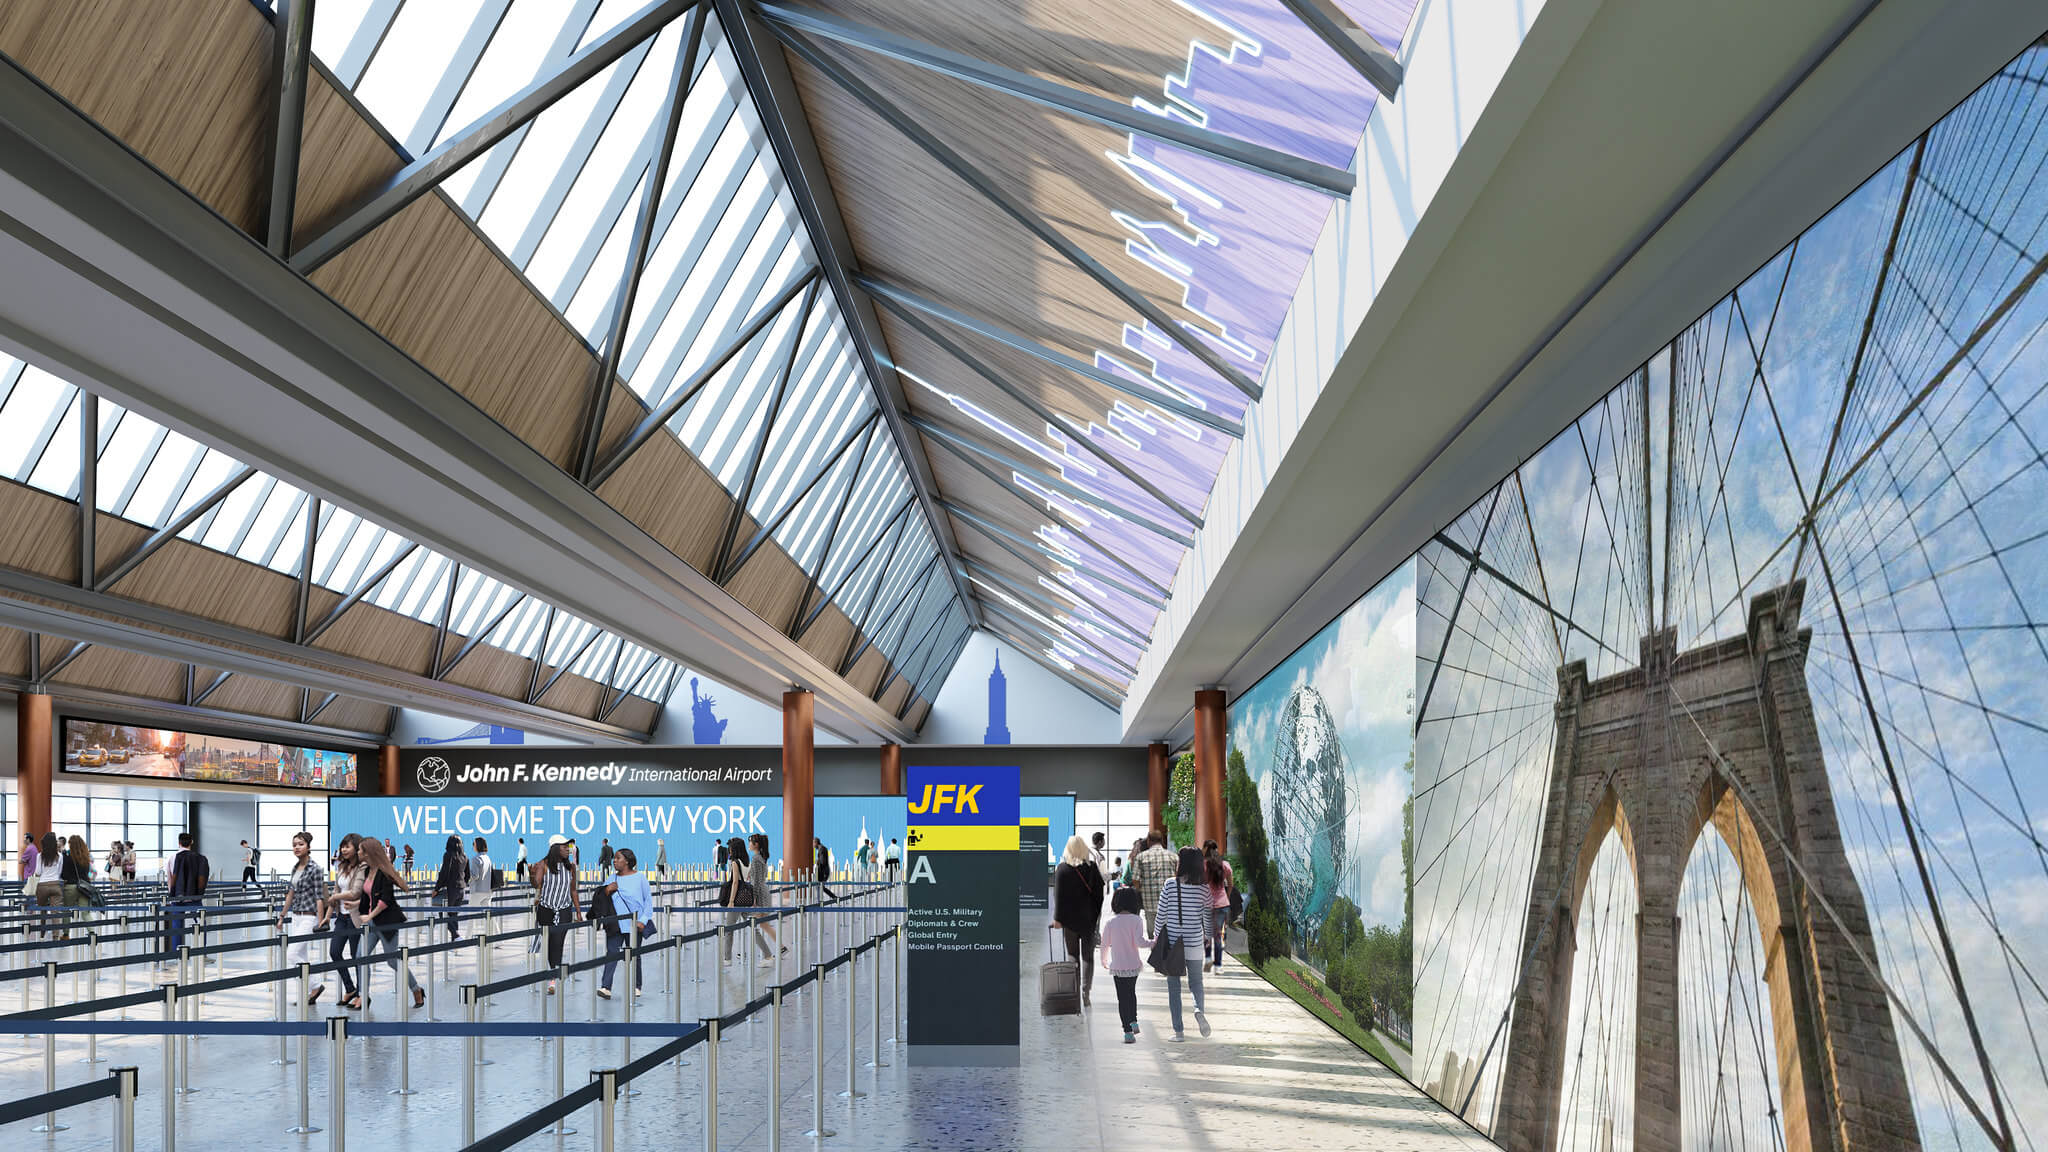 rendering of an airport customs hall